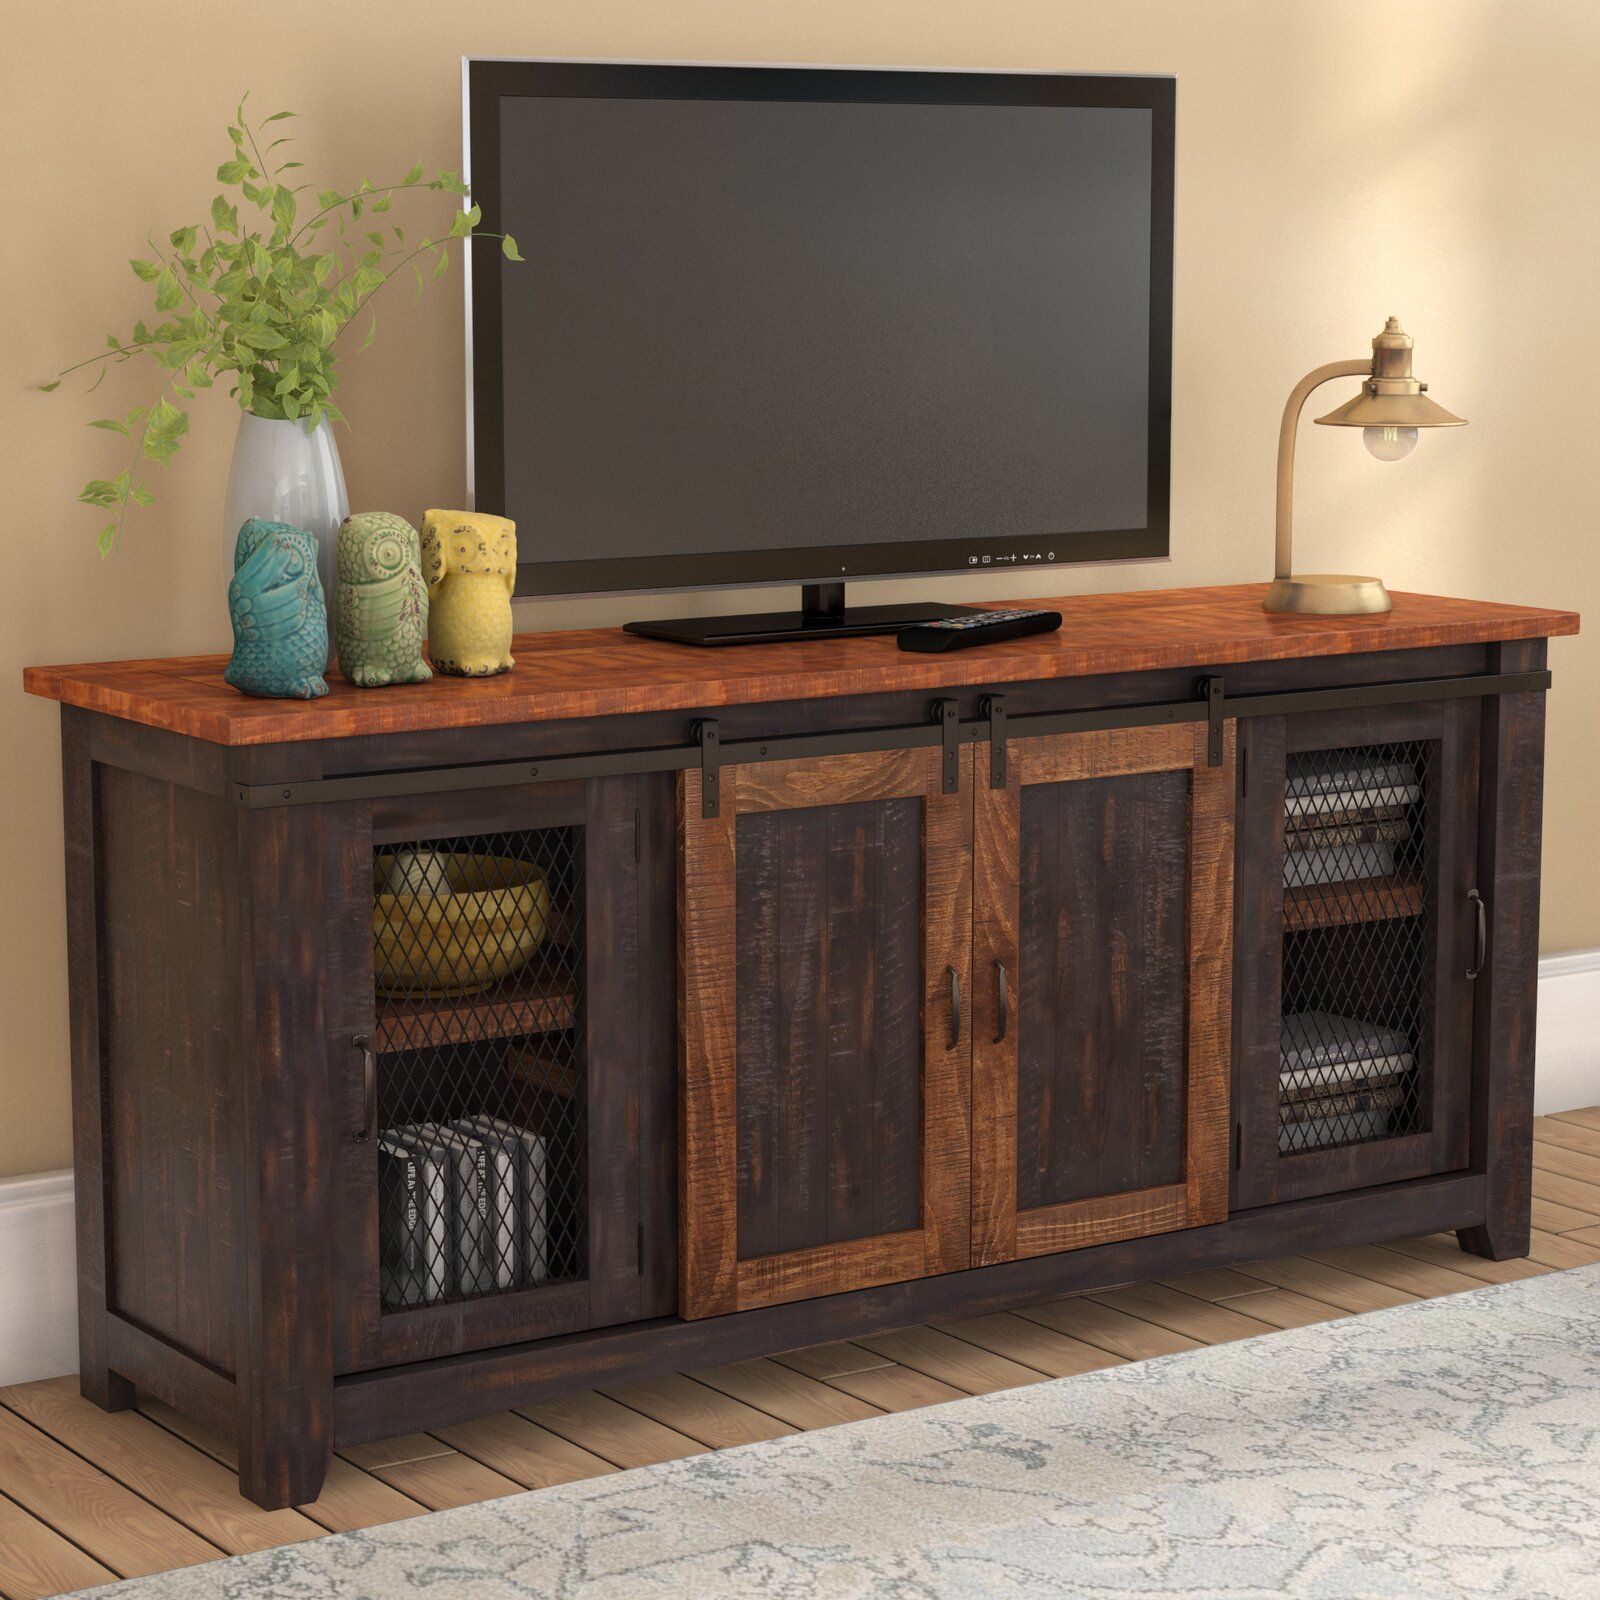 Belen Tv Stand For Tvs Up To 70" & Reviews | Joss & Main For Giltner Solid Wood Tv Stands For Tvs Up To 65" (Photo 5 of 15)